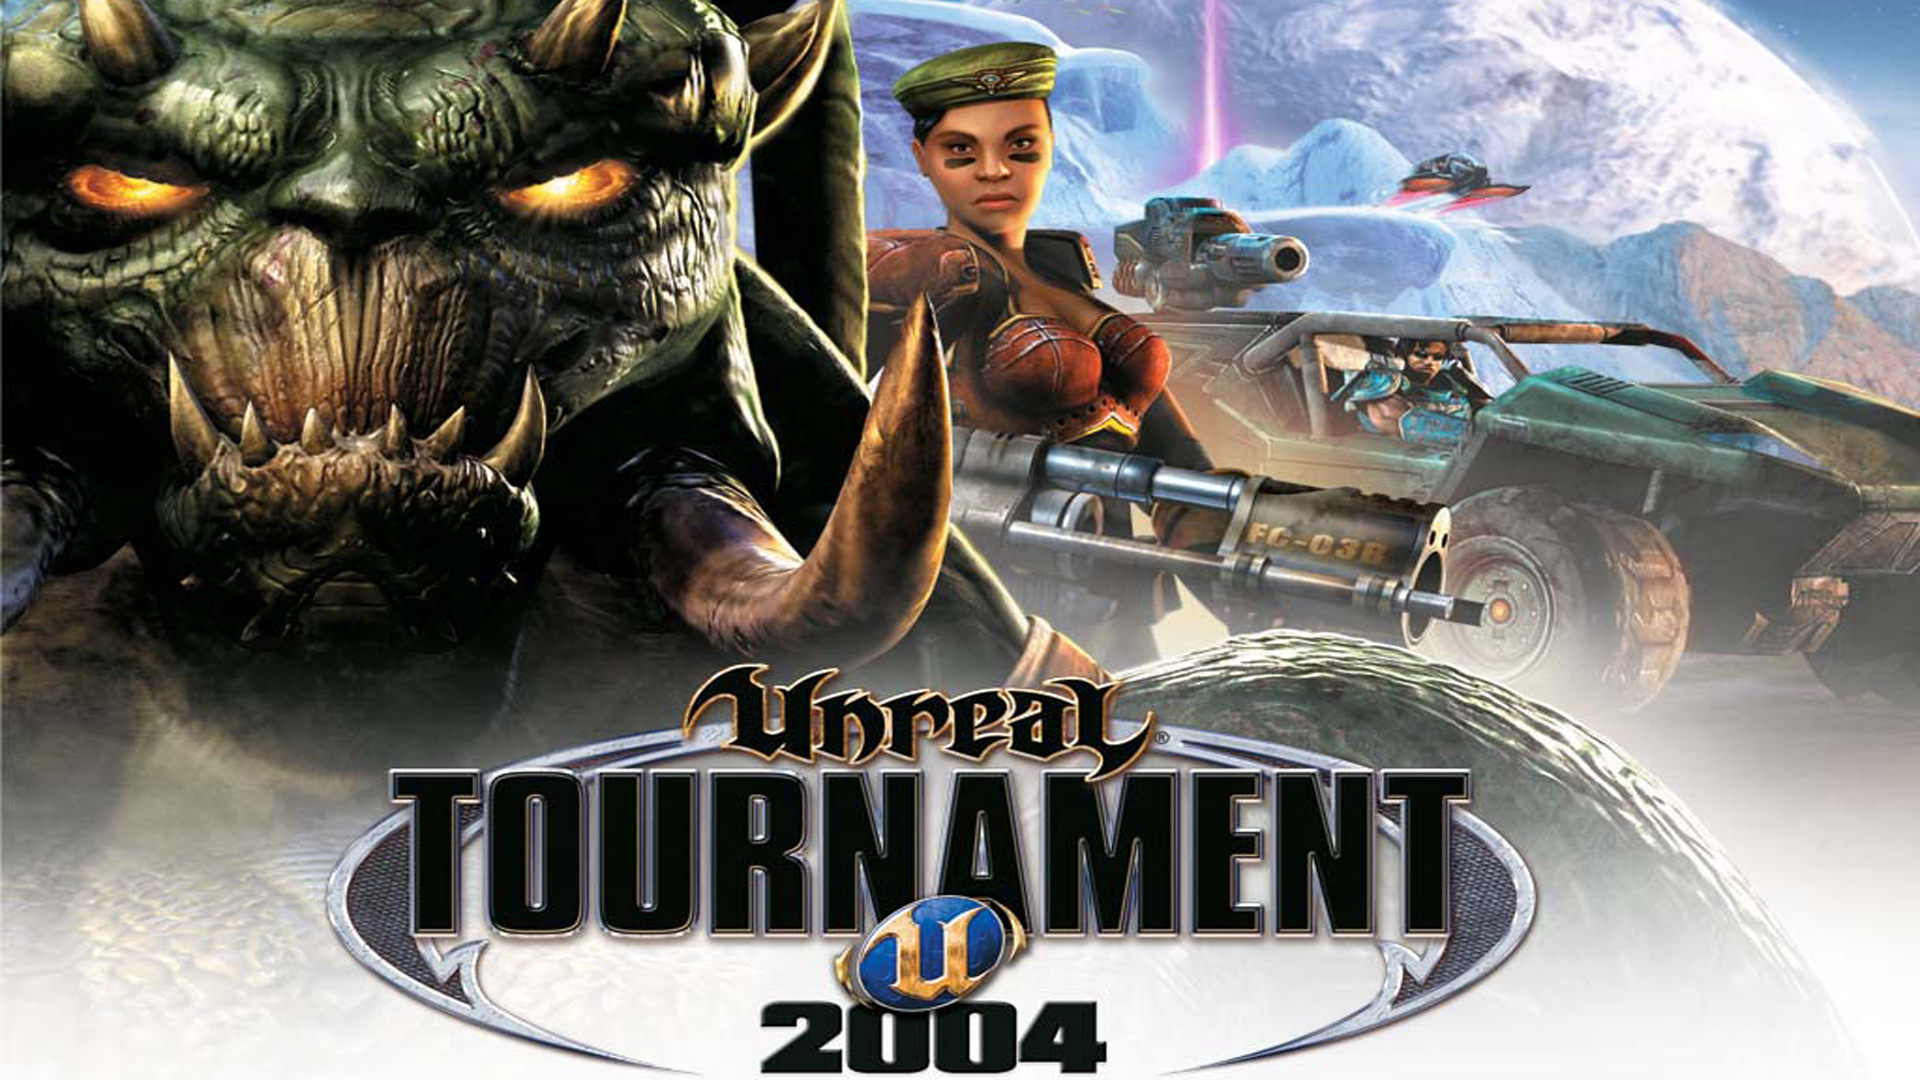 An hour of Unreal Tournament 2004